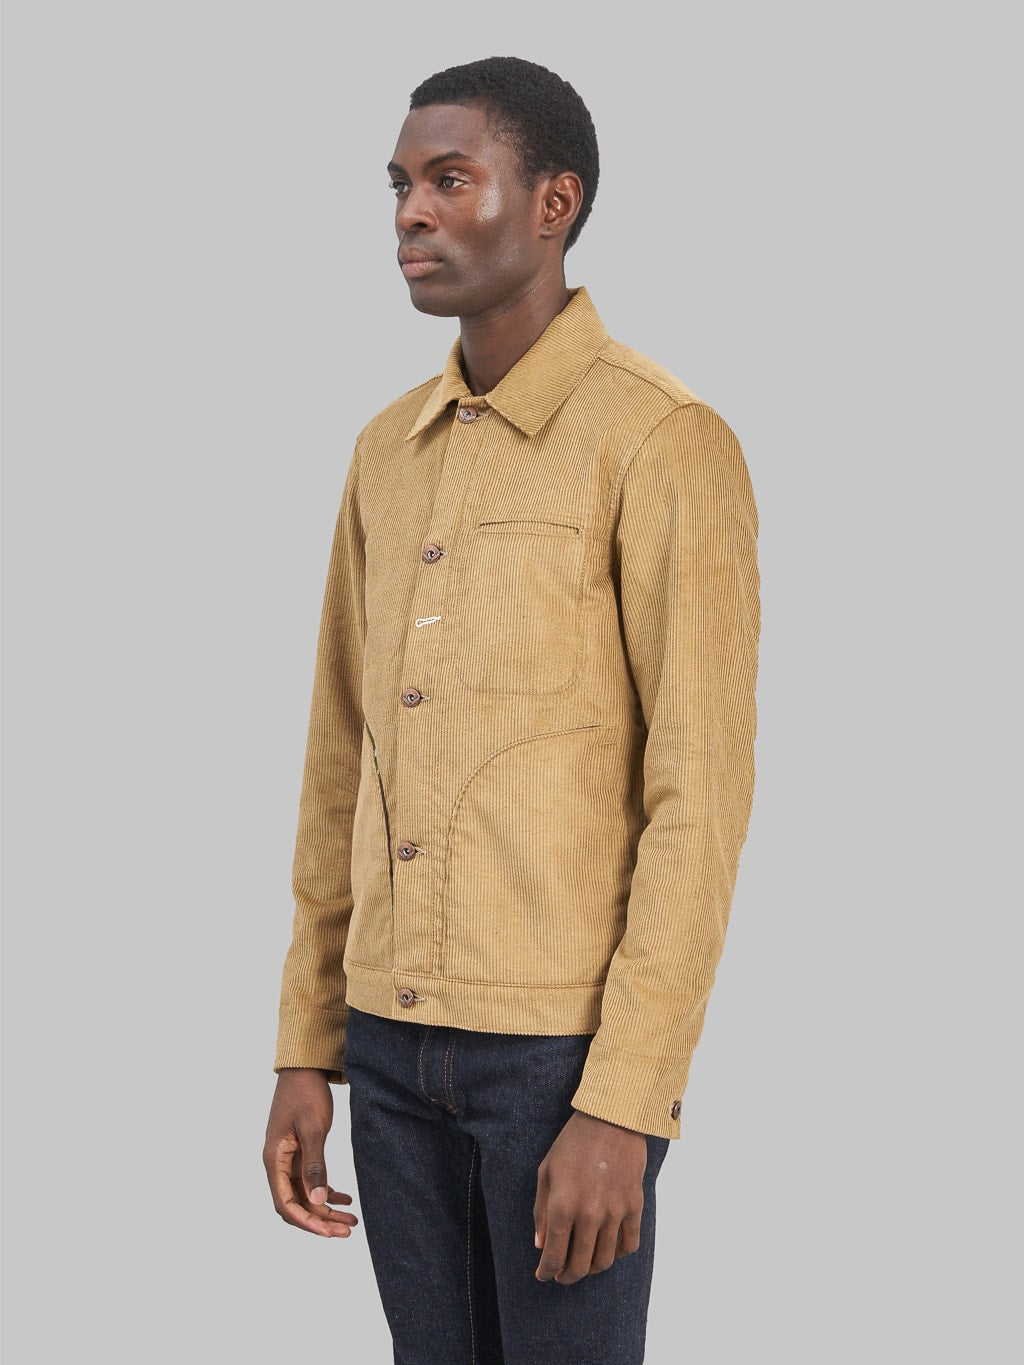 Rogue Territory Supply Jacket Lined Tan Corduroy side fit